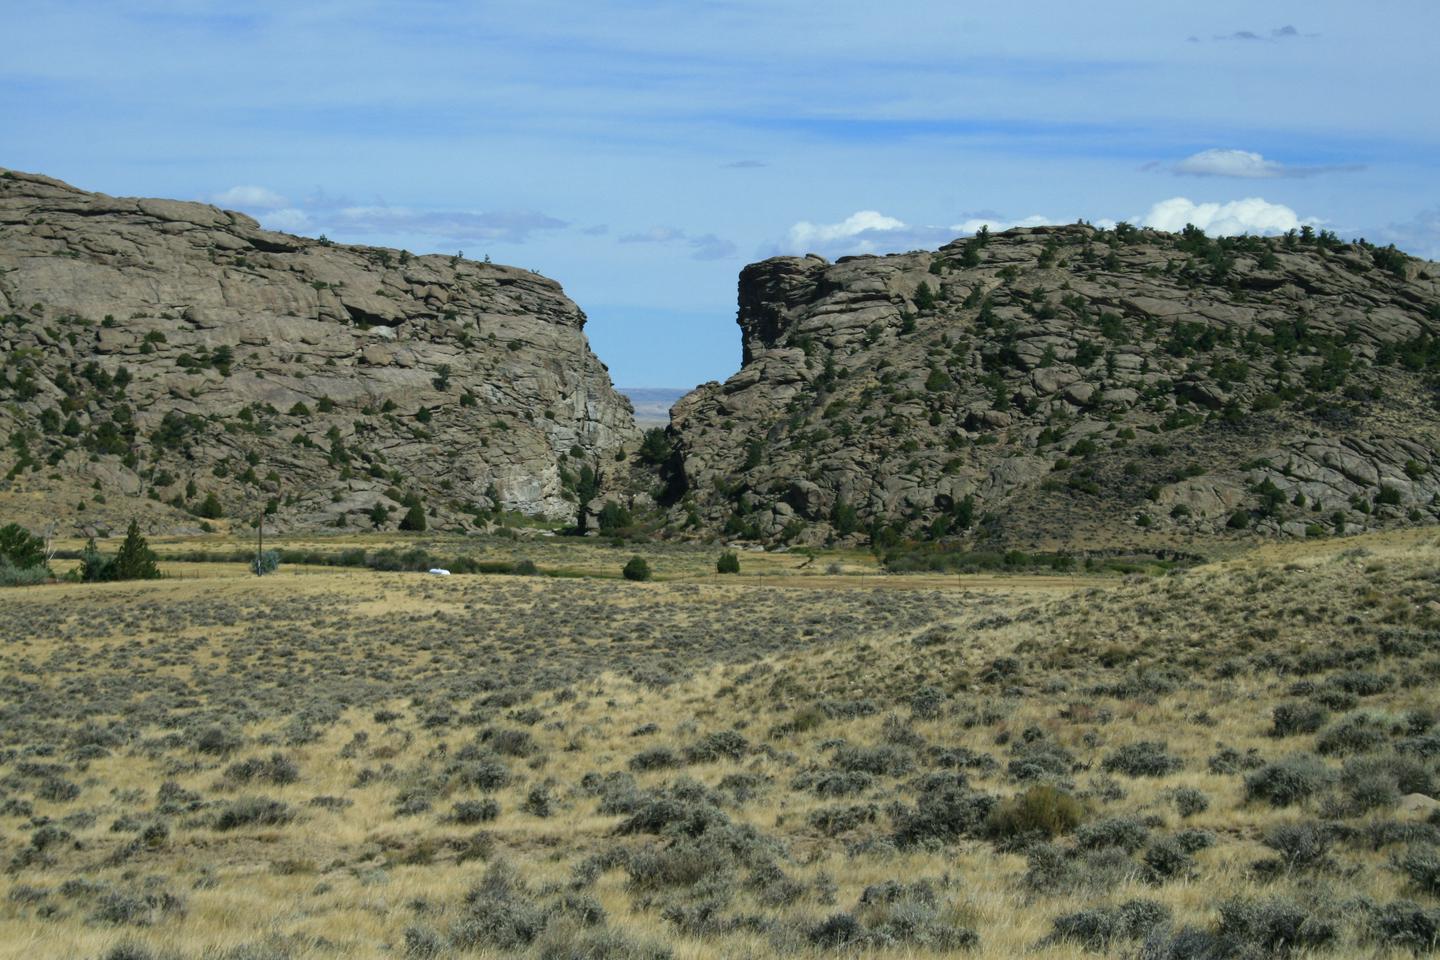 Devil's Gate, WyomingDevil's Gate was an important landmark on the trail in Wyoming.